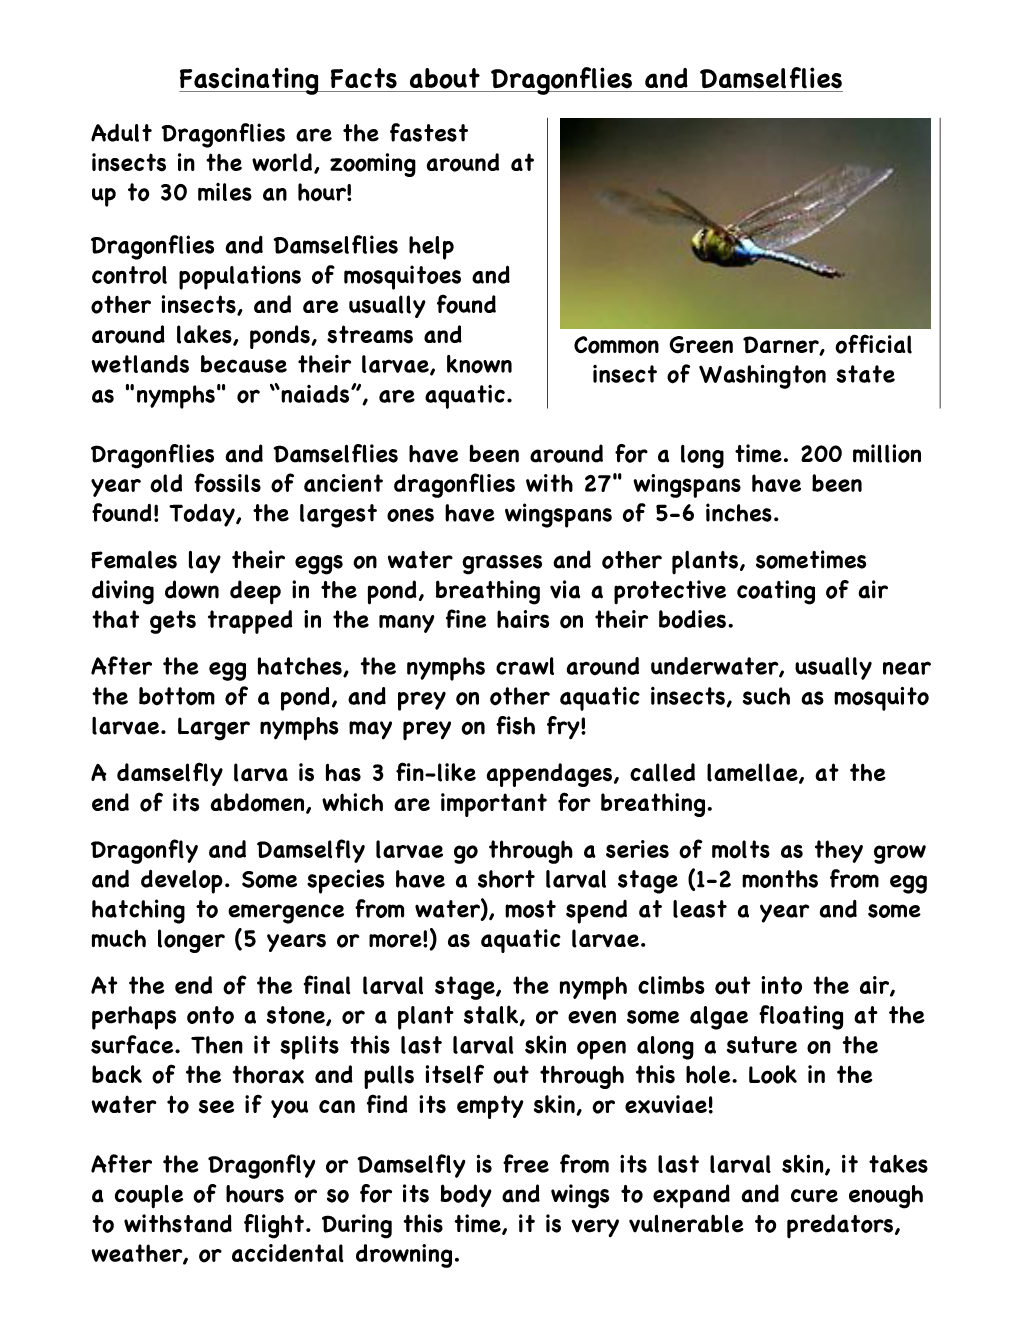 Fascinating Facts About Dragonflies and Damselflies